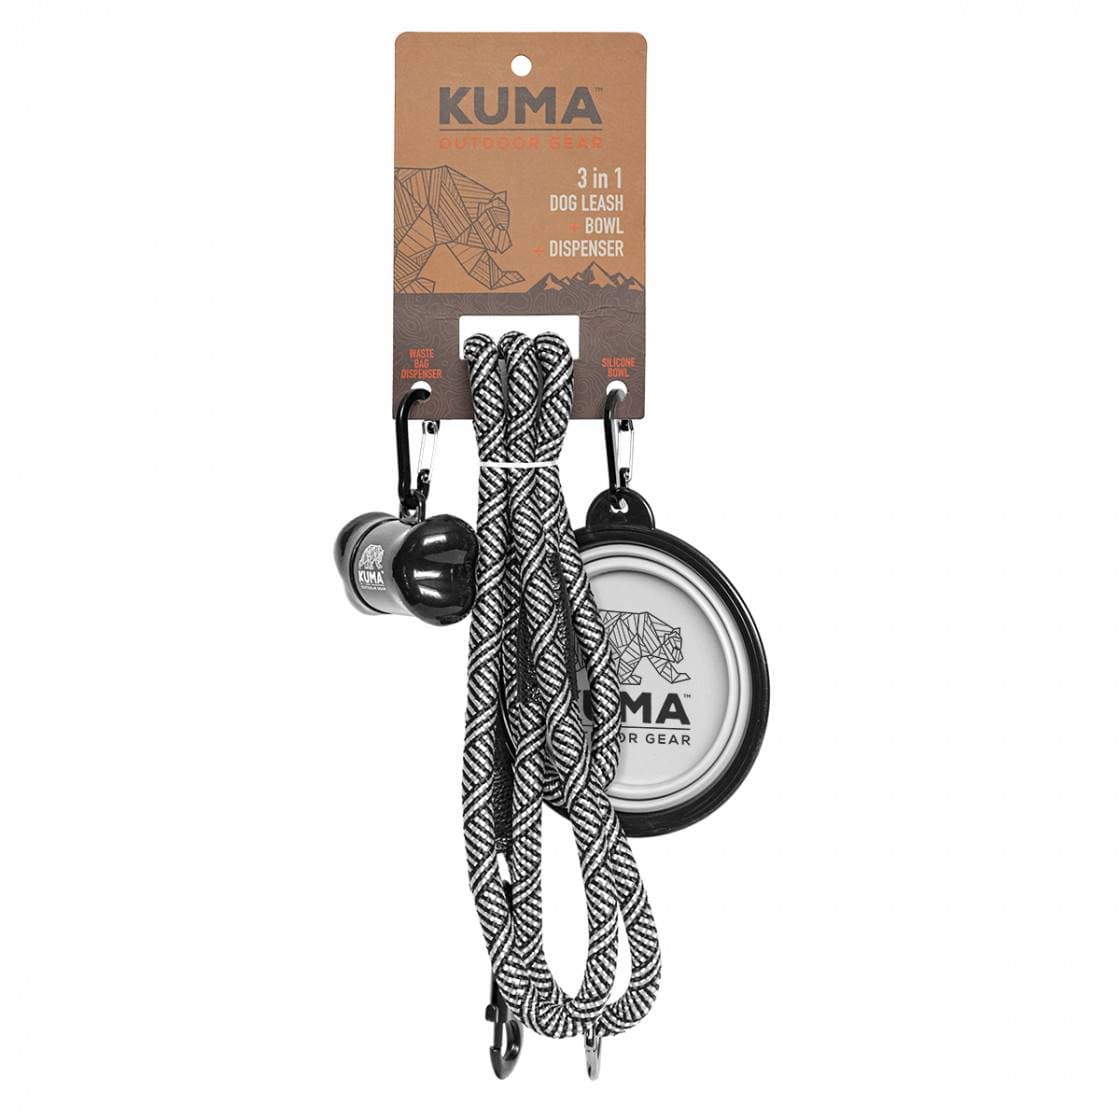 Kuma Outdoor Gear Qualifies for Free Shipping Kuma Outdoor Gear 3-In-1 Dog Leash White/Black #KM-31DL-WB